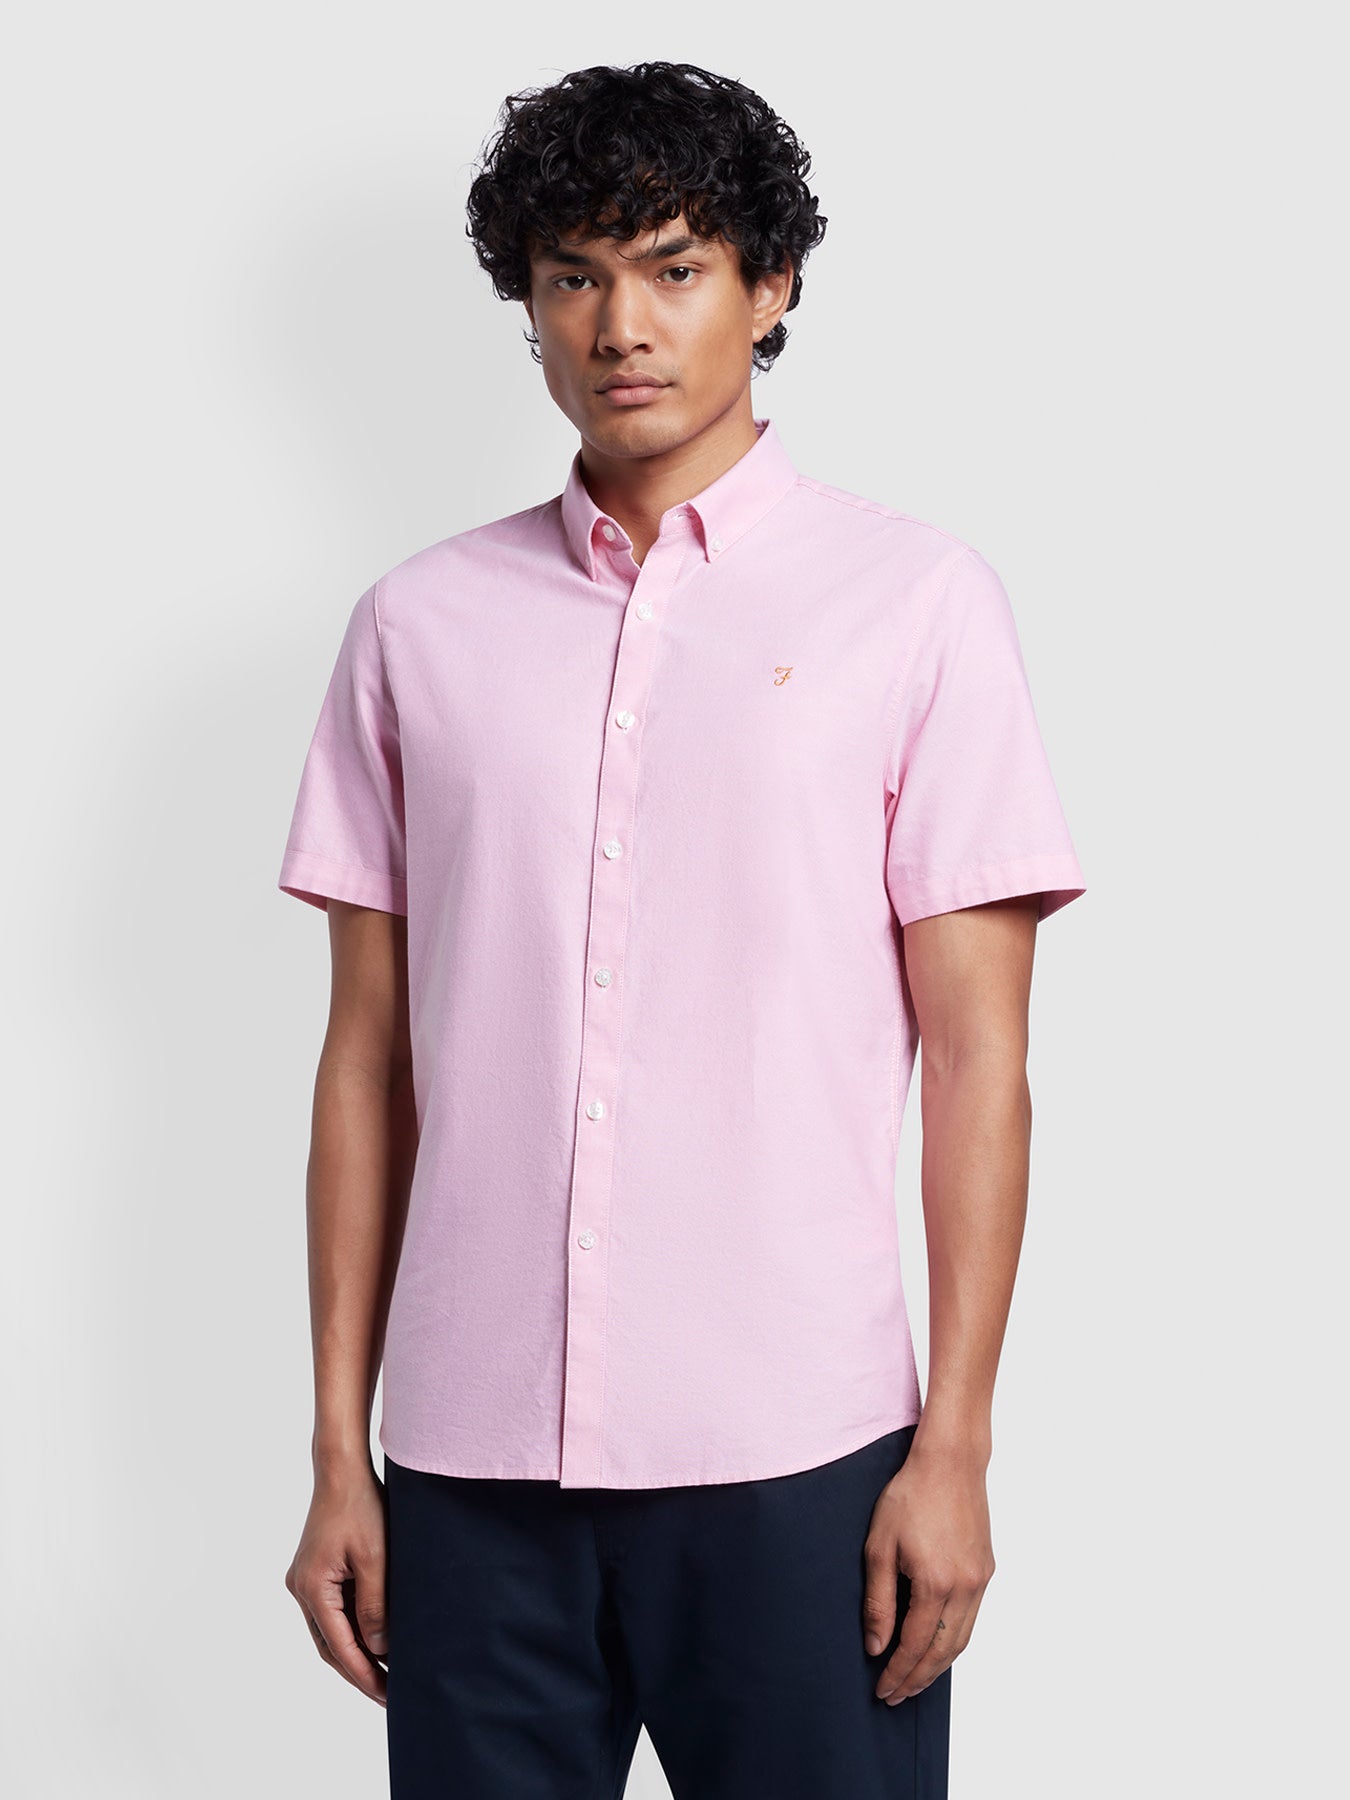 View Brewer Short Sleeve Shirt In Coral Pink information